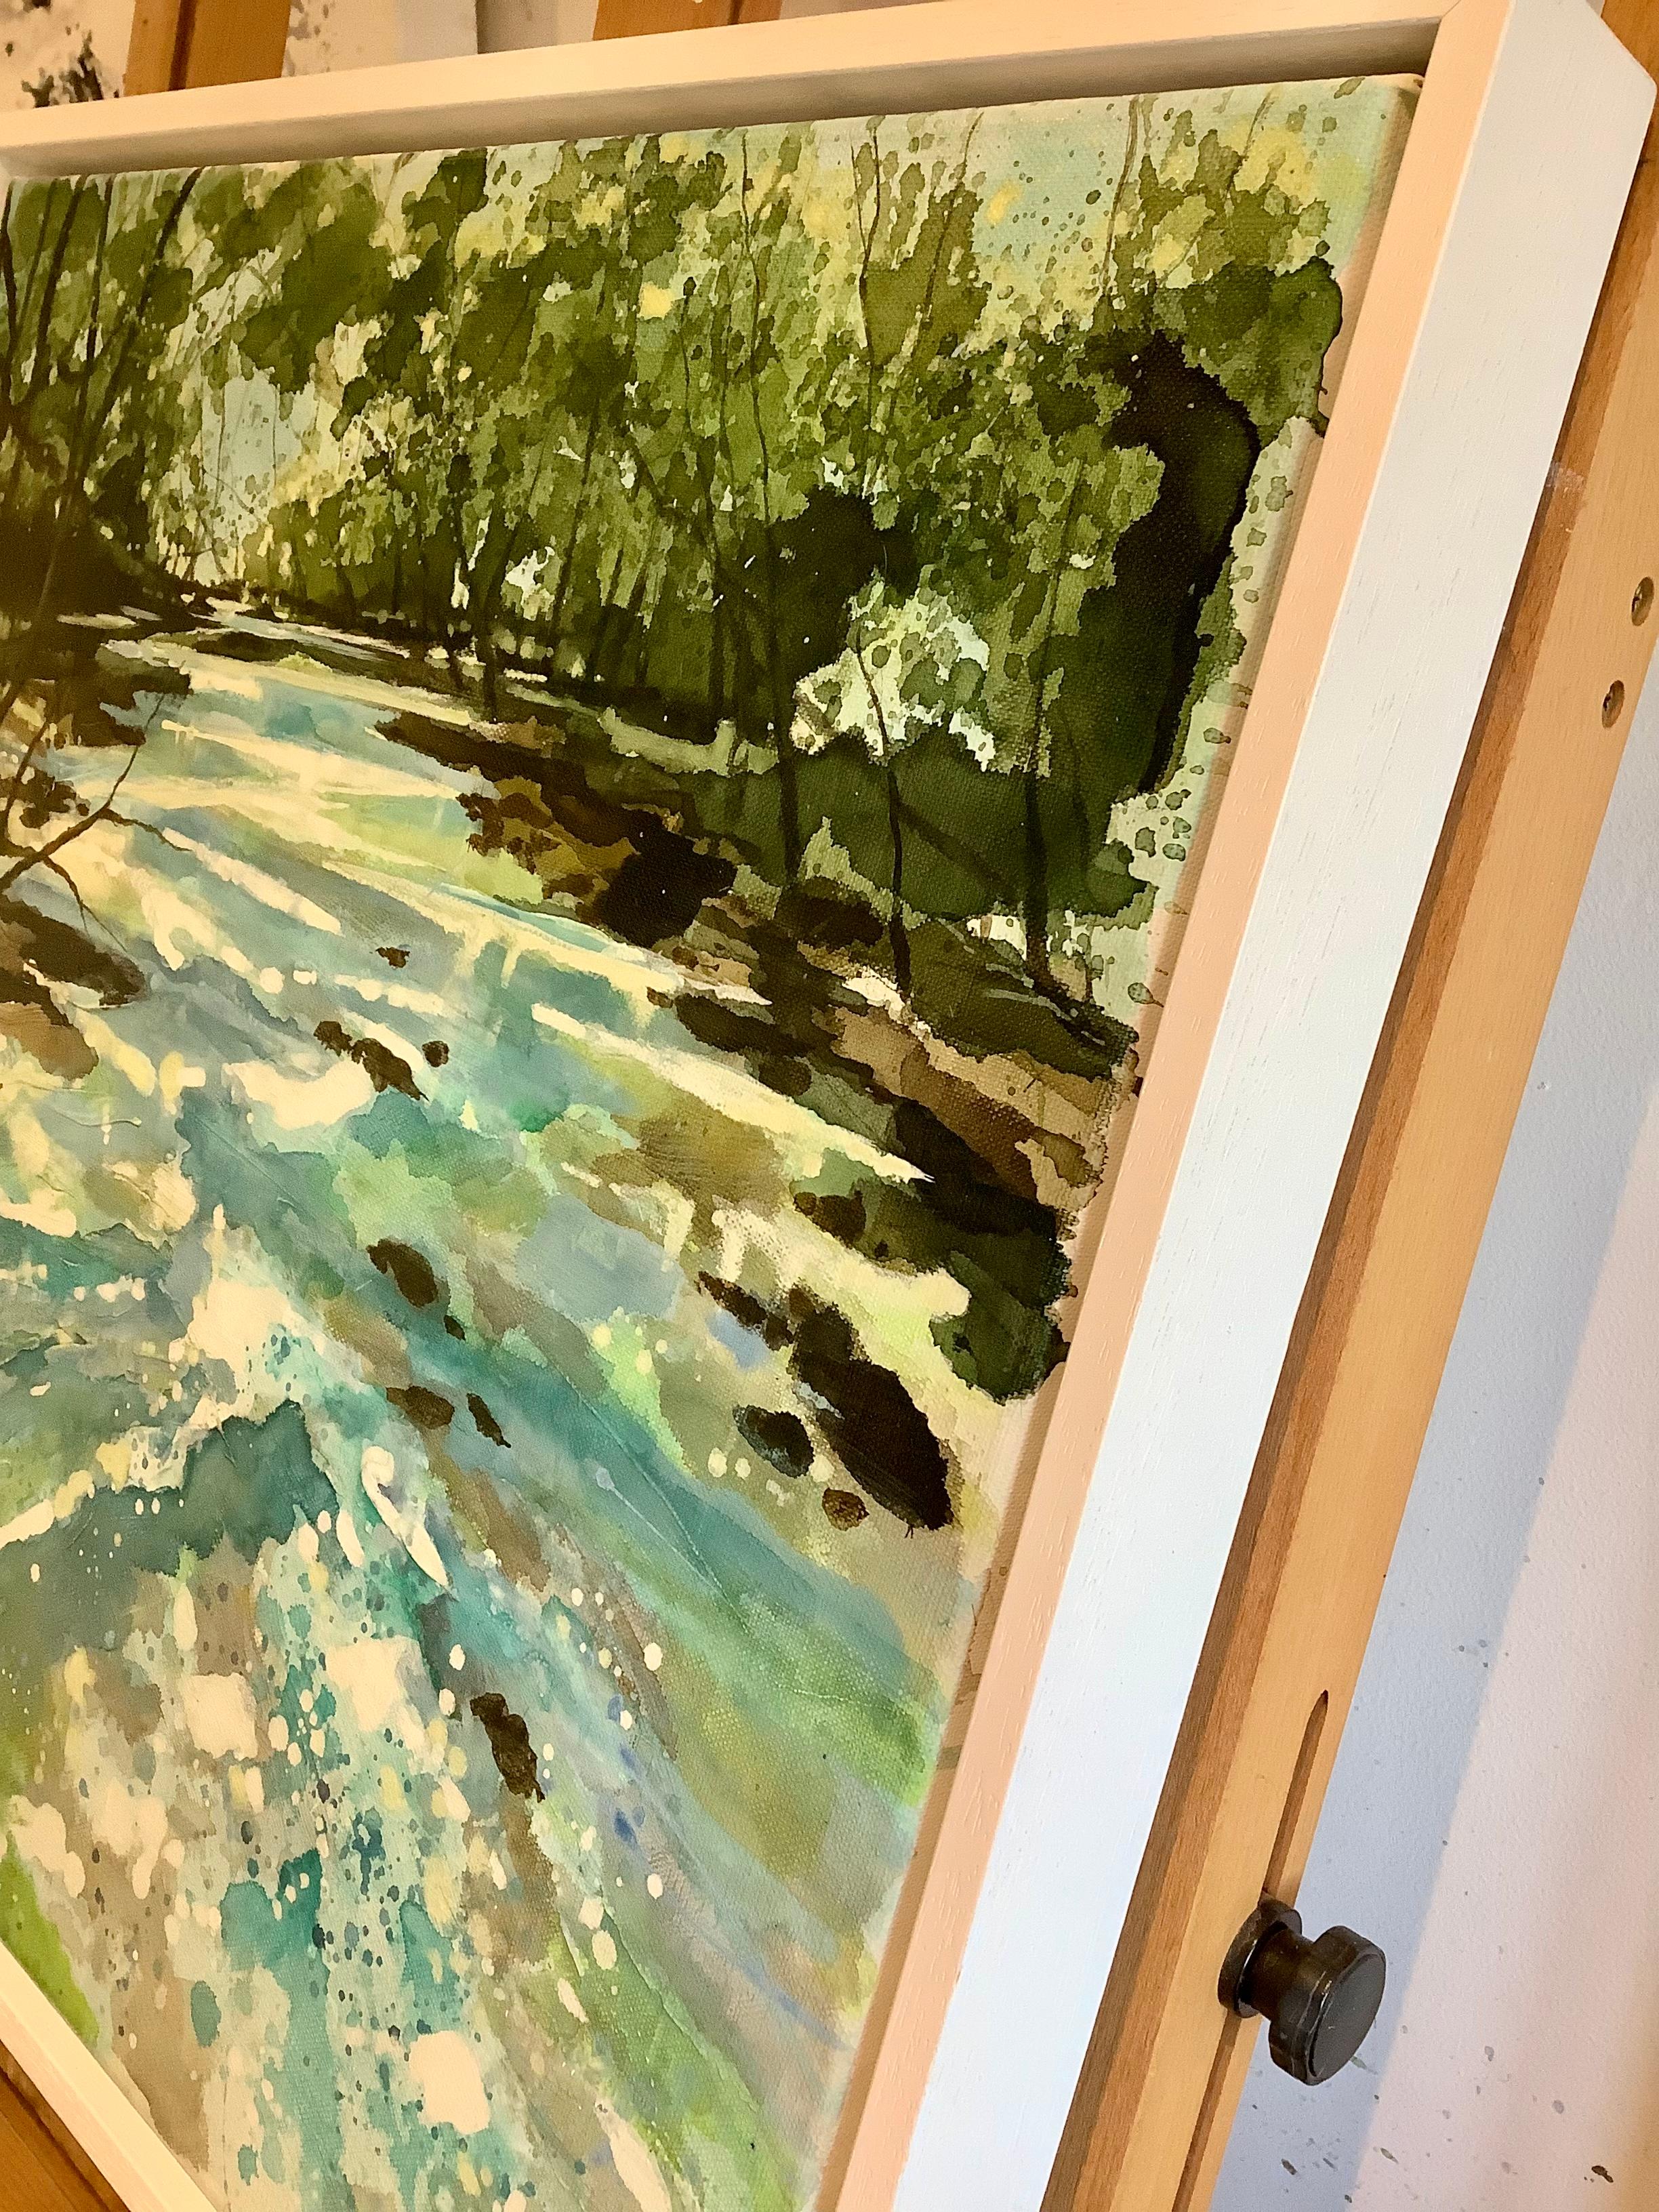 Always Our Place, is a riverscape painting full of energy and movement, yet it exudes a feeling of harmony, peace and tranquility. The River in this painting is the river Wye near Hereford, Adele Riley loves to paint this river in all of the seasons